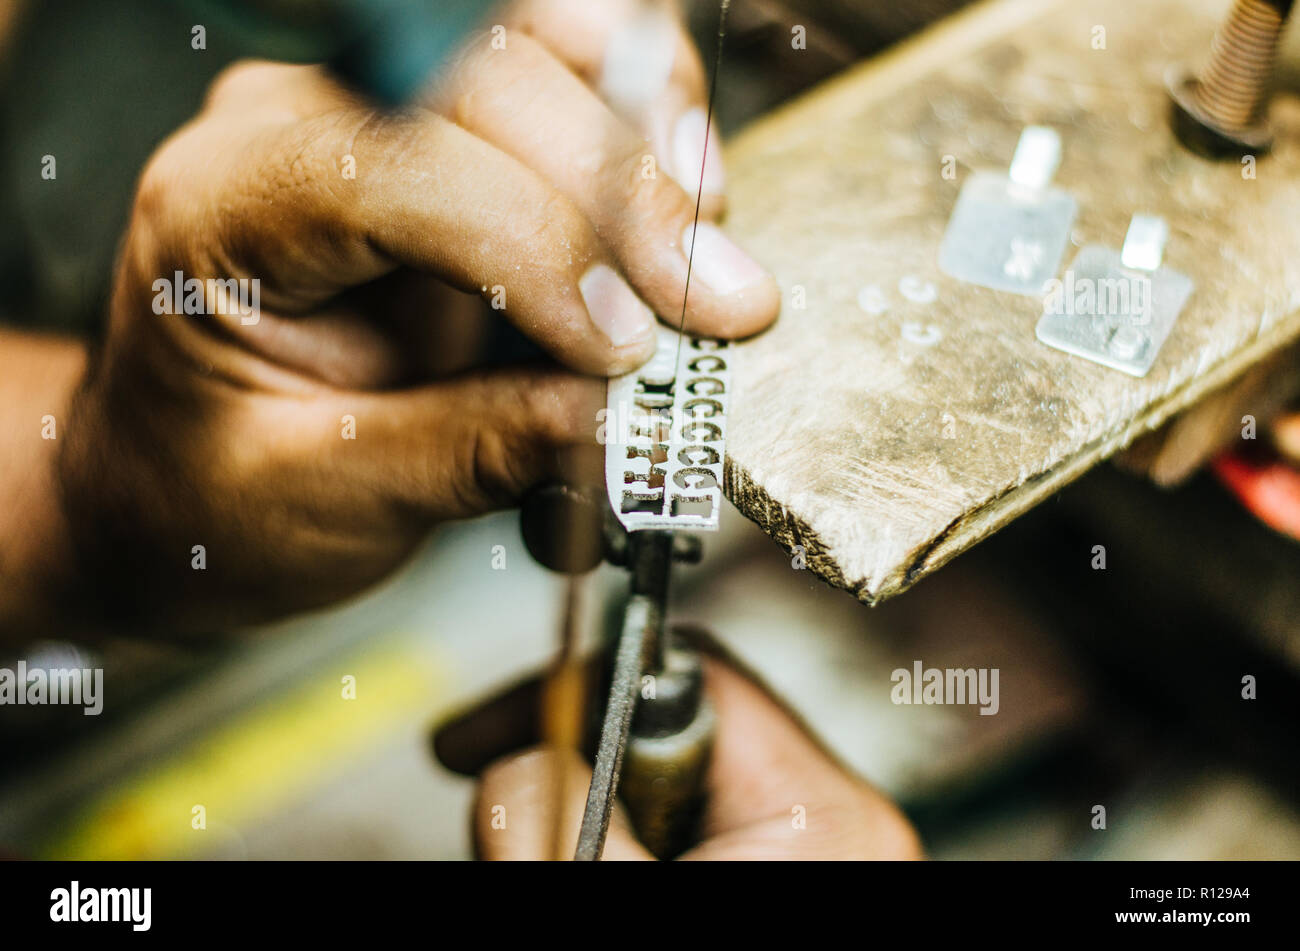 man's hands goldsmith work on a piece of silver with a metal saw on the work table, close up, selected focus, narrow depth of field Stock Photo